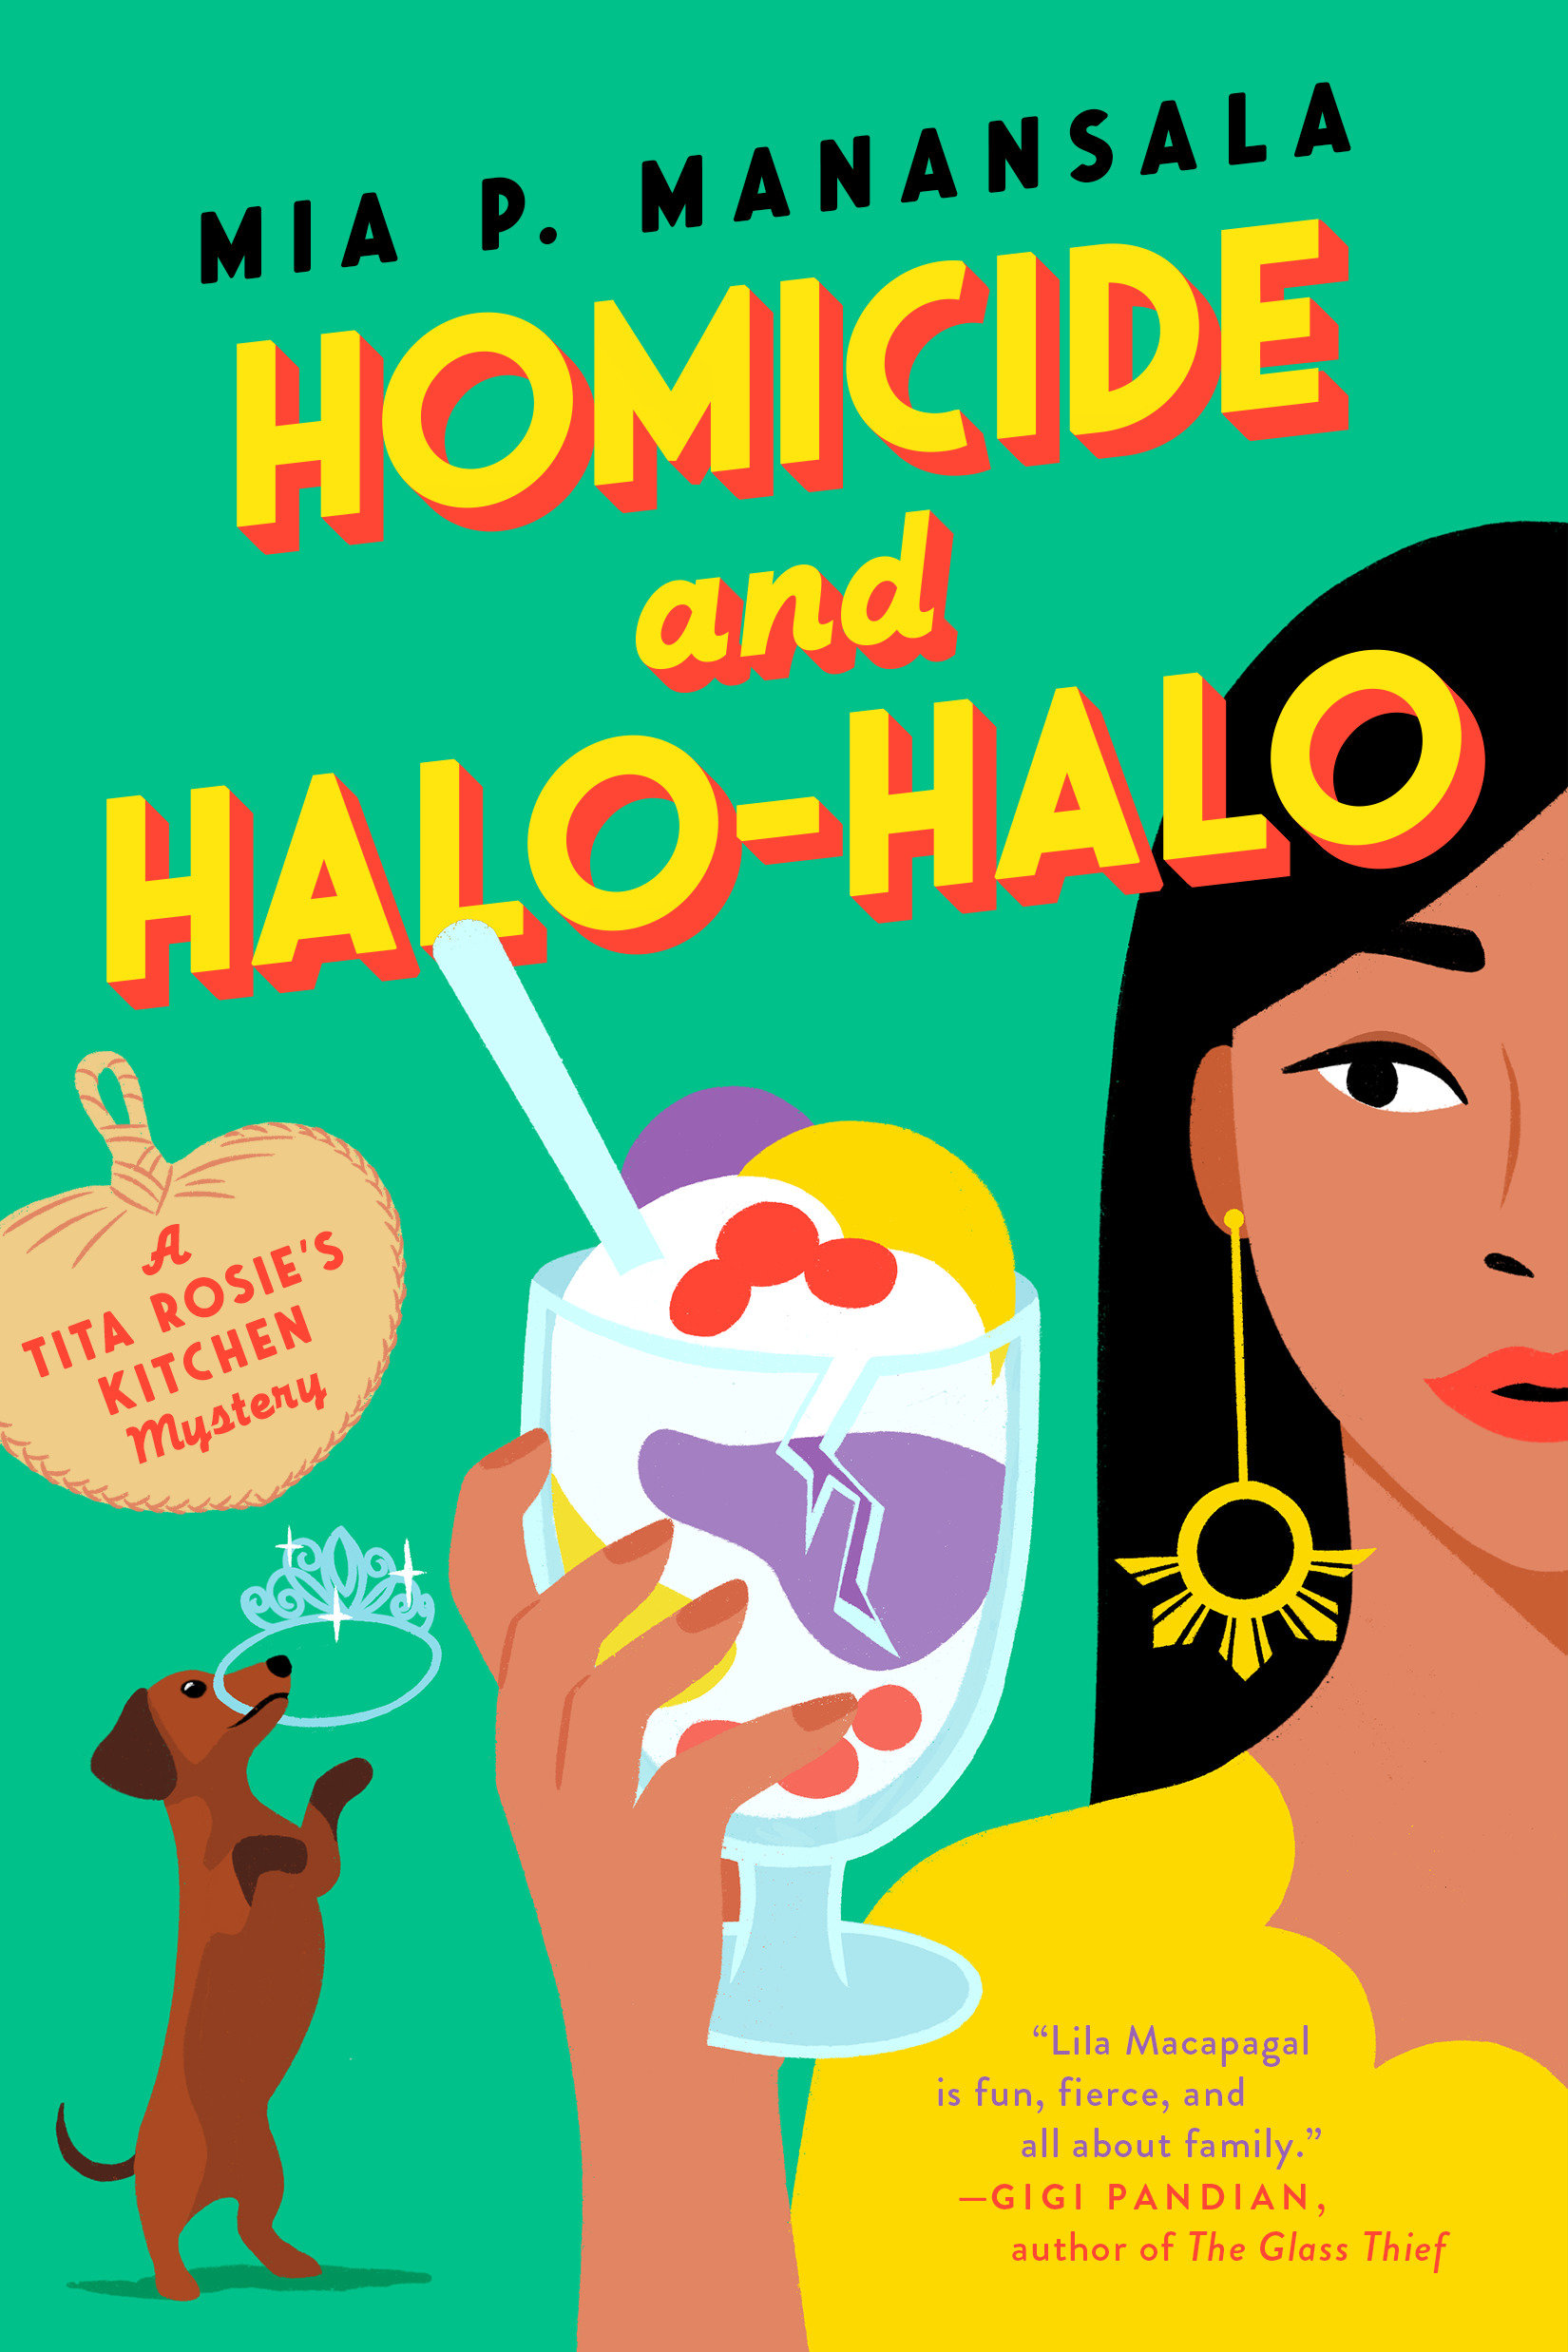 Cover Image of Homicide and Halo-Halo